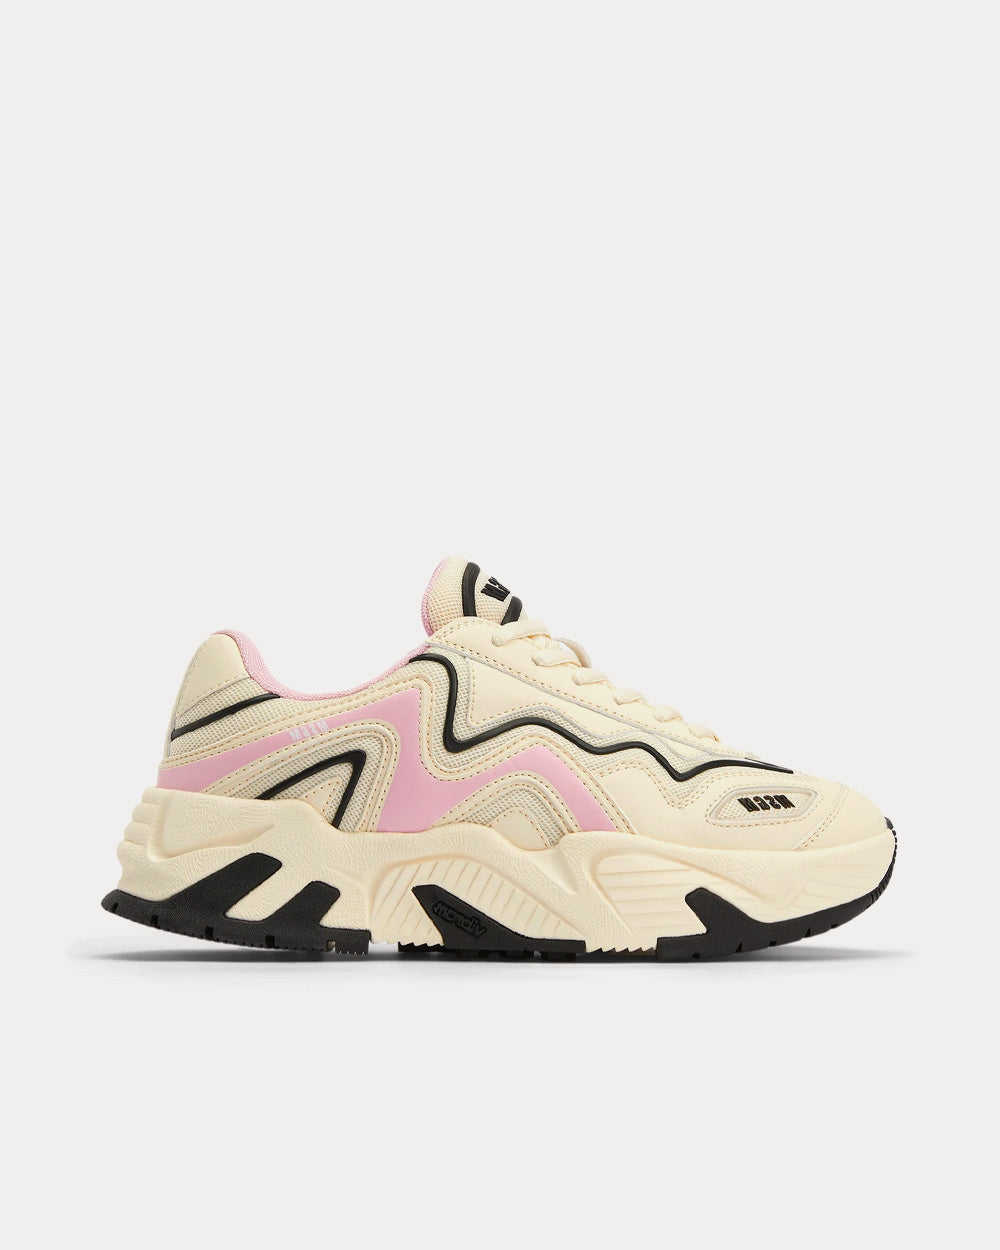 MSGM - Vortex Leather & Fabric Beige Low Top Sneakers